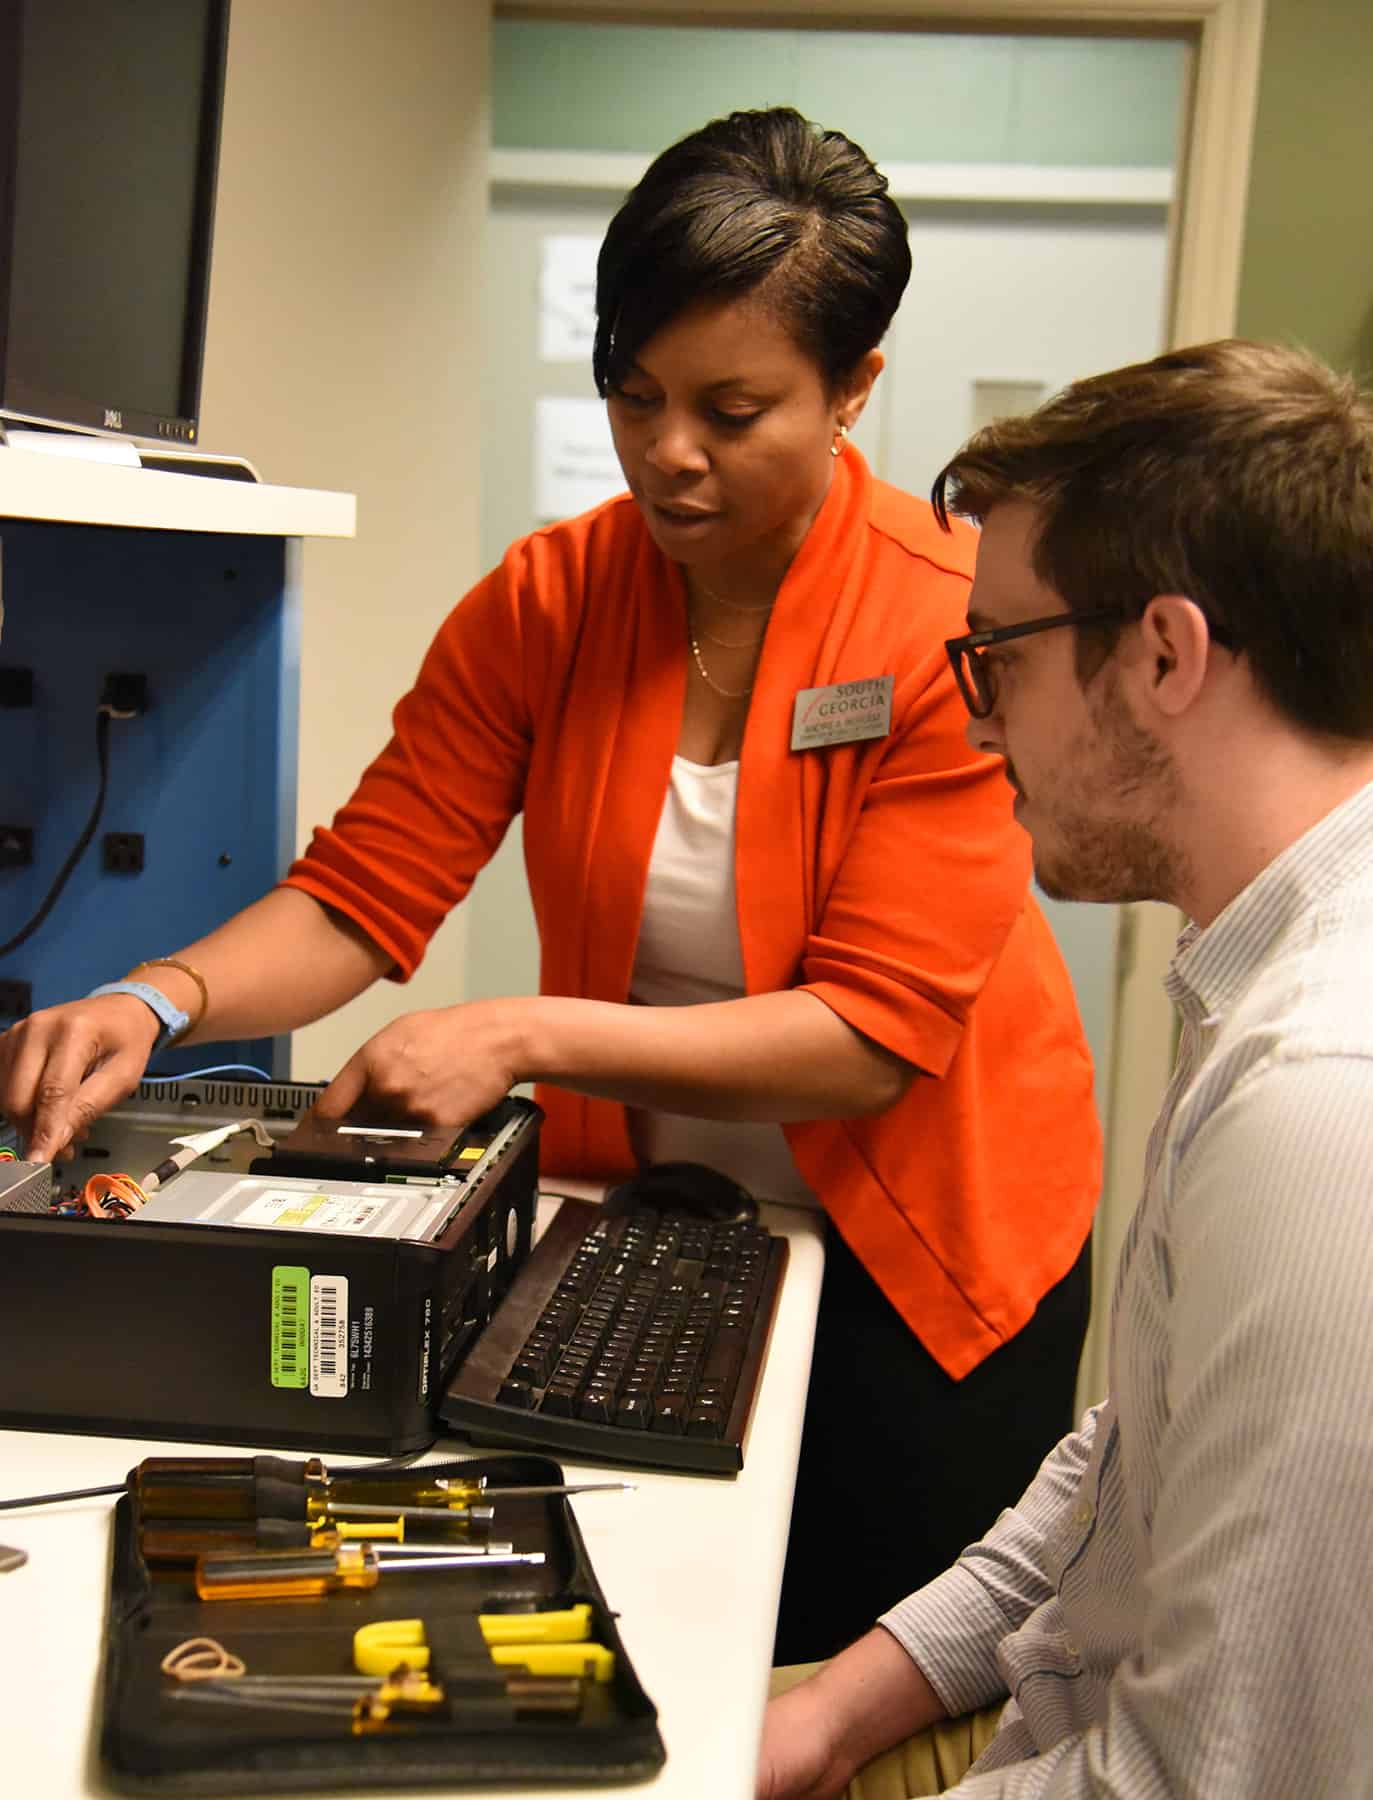 SGTC Americus CIS Instructor Andrea Ingram is shown above working with a student and showing him how to repair a computer.